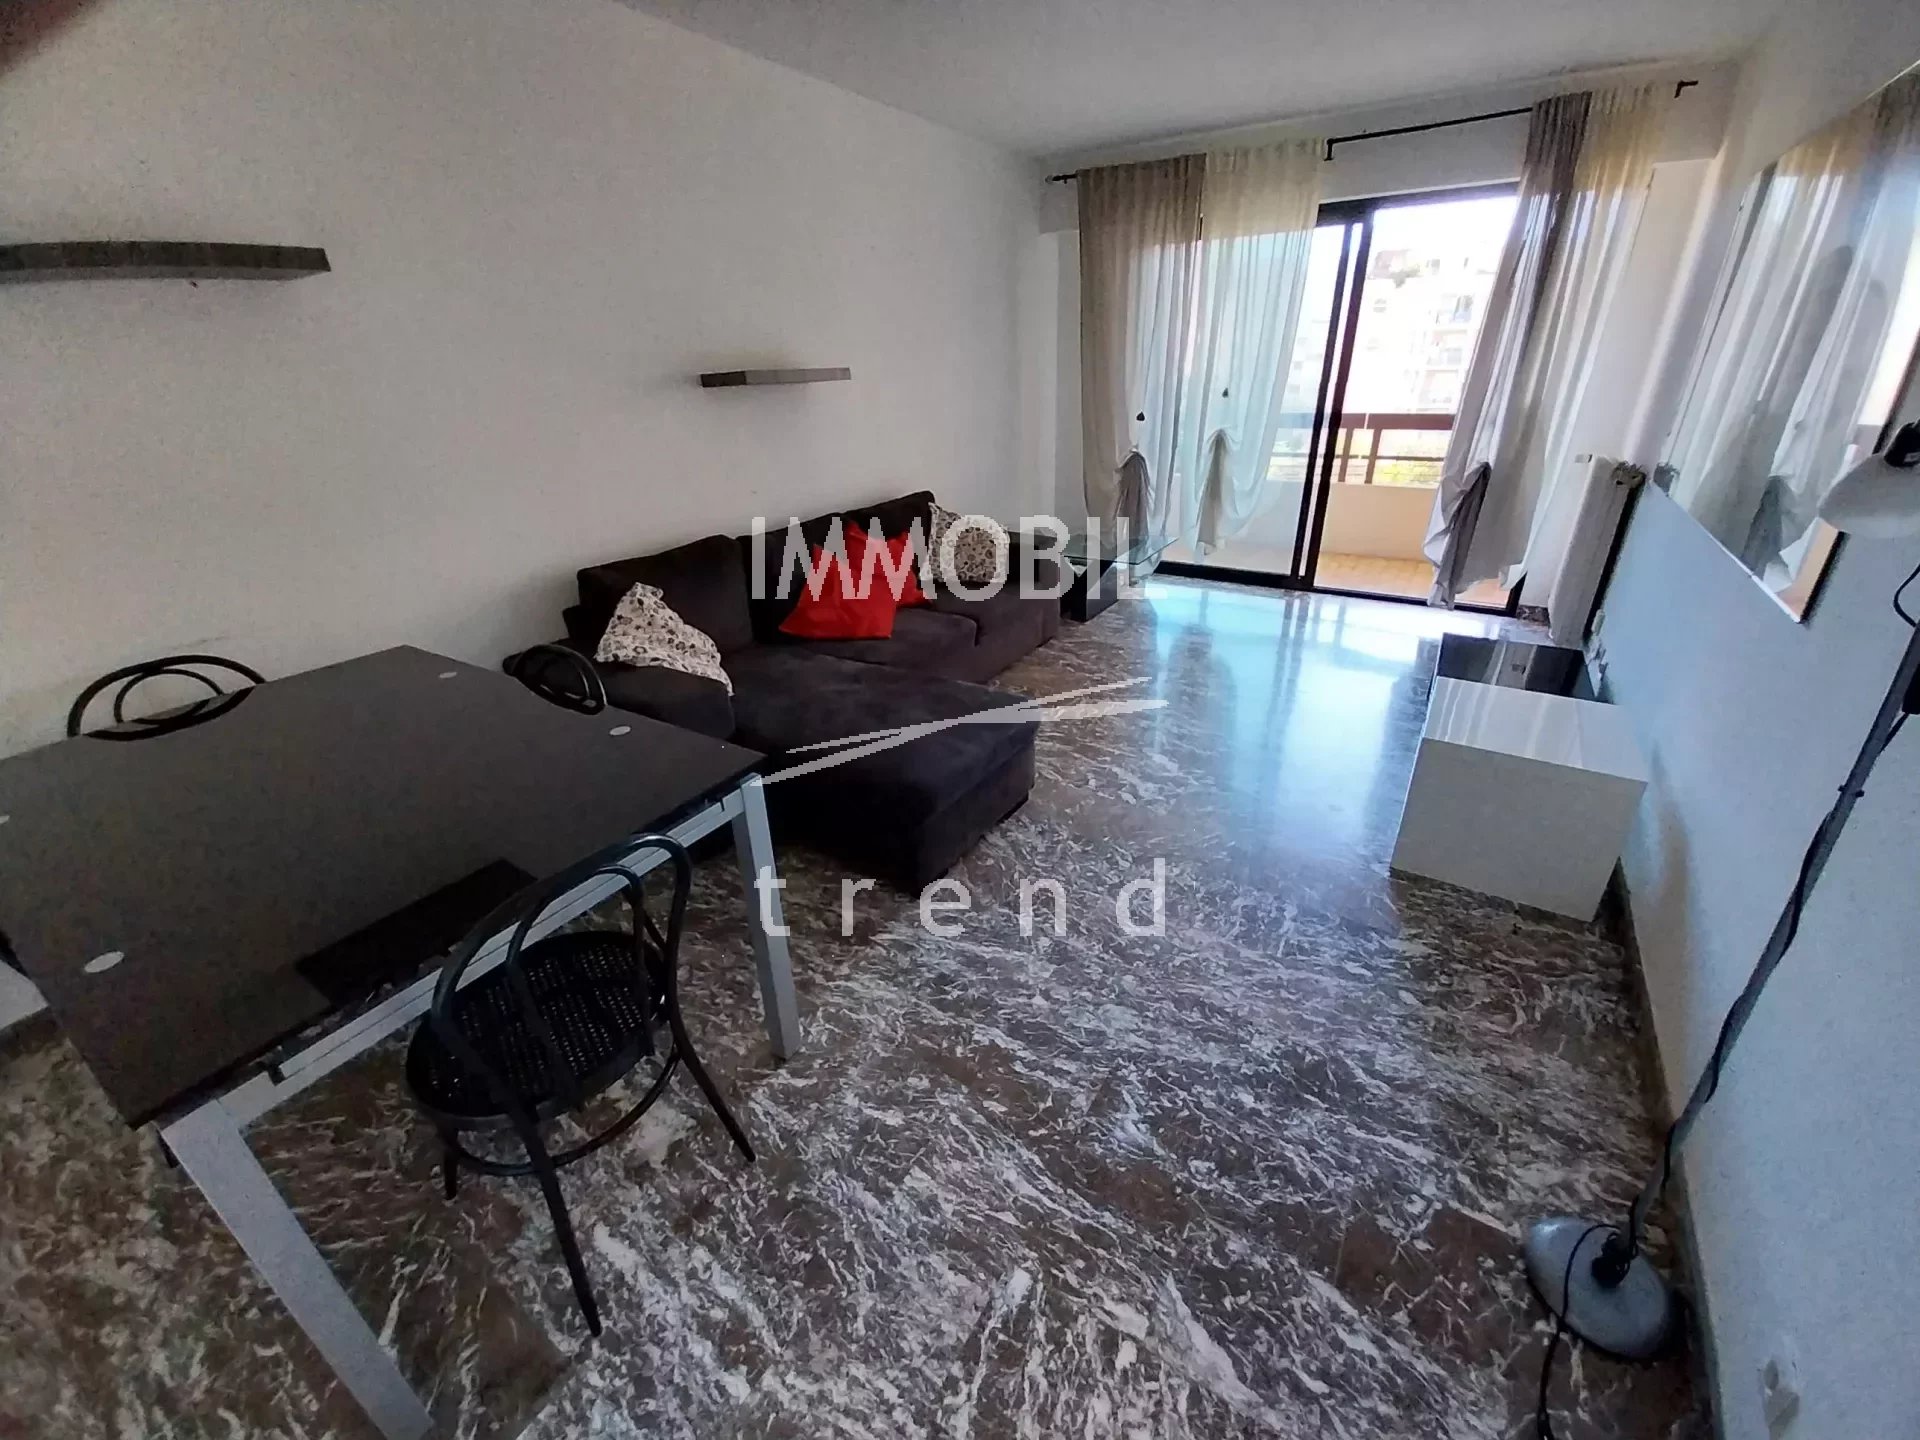 MENTON REAL ESTATE - 1 bedroom apartment for sale with balcony and cellar